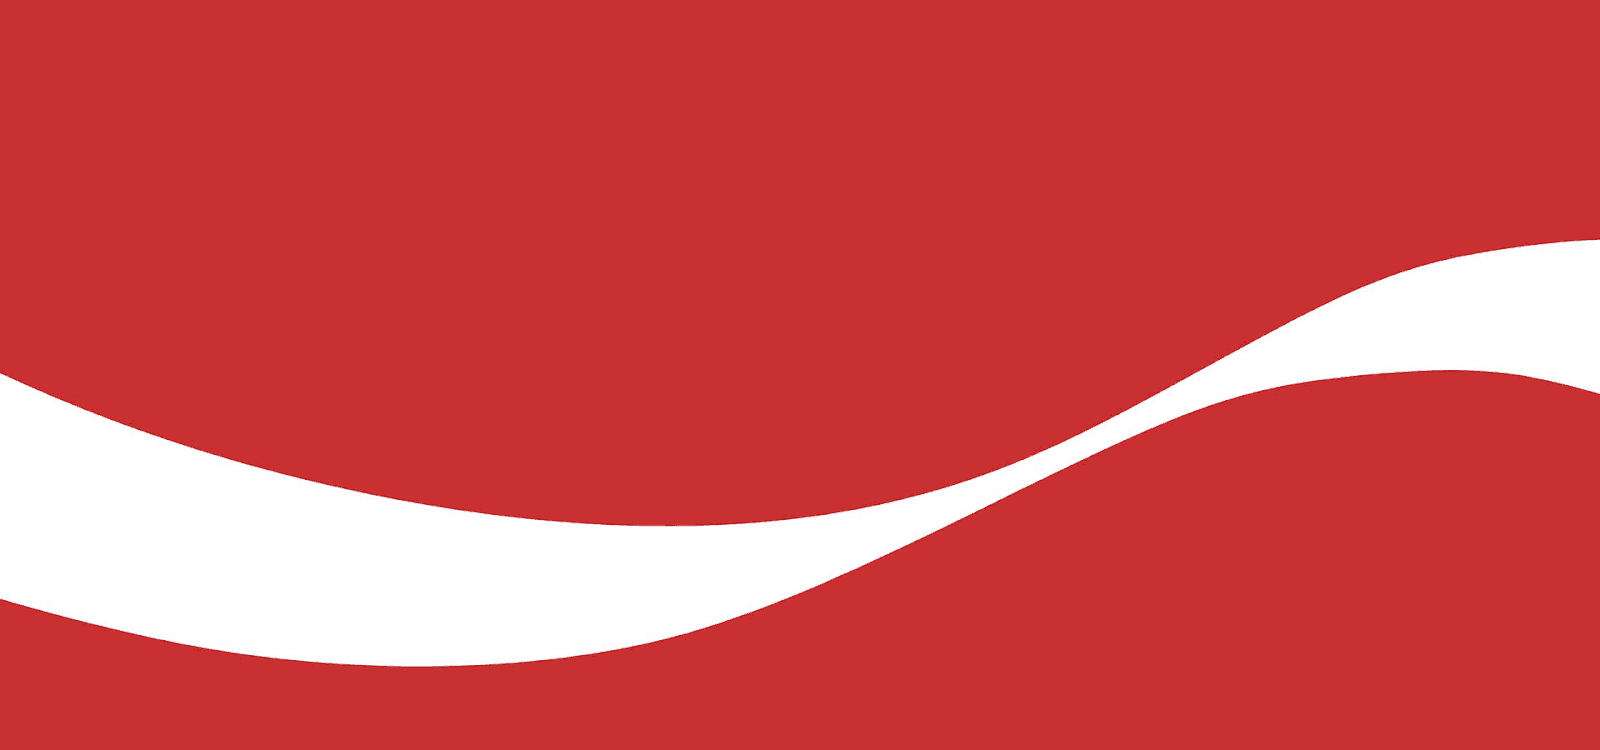 Coke logo without words